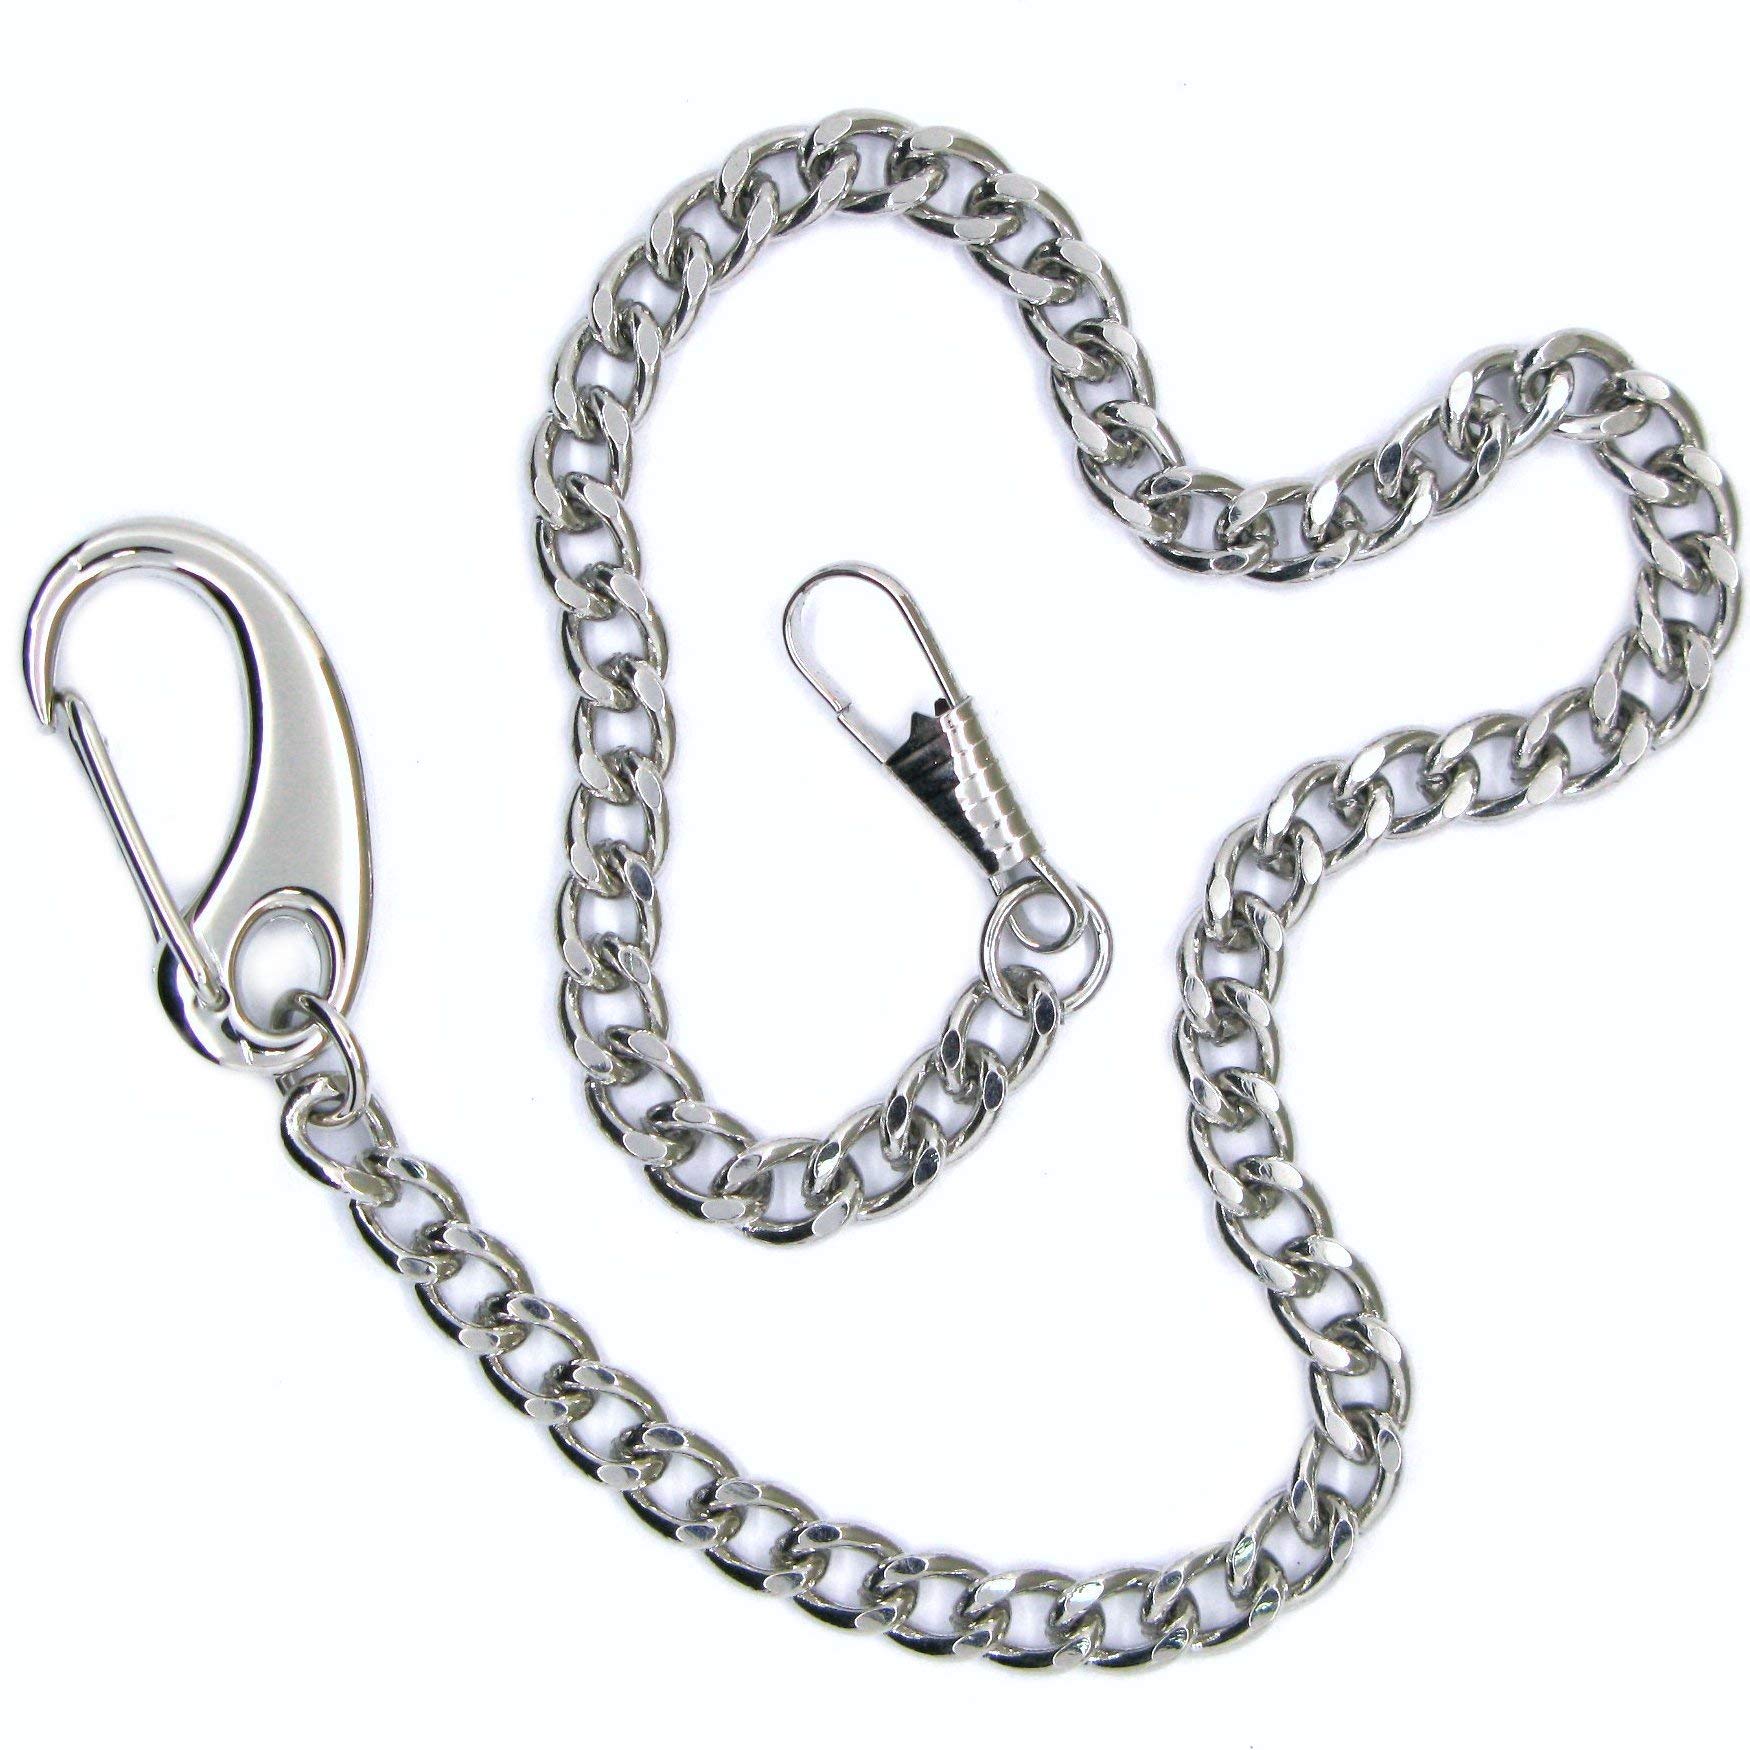 watchvshop Pocket Watch Chain Albert Chain Silver Tone Fine Polish Vest Chain with Large Lobster Claw Clasp FC13A